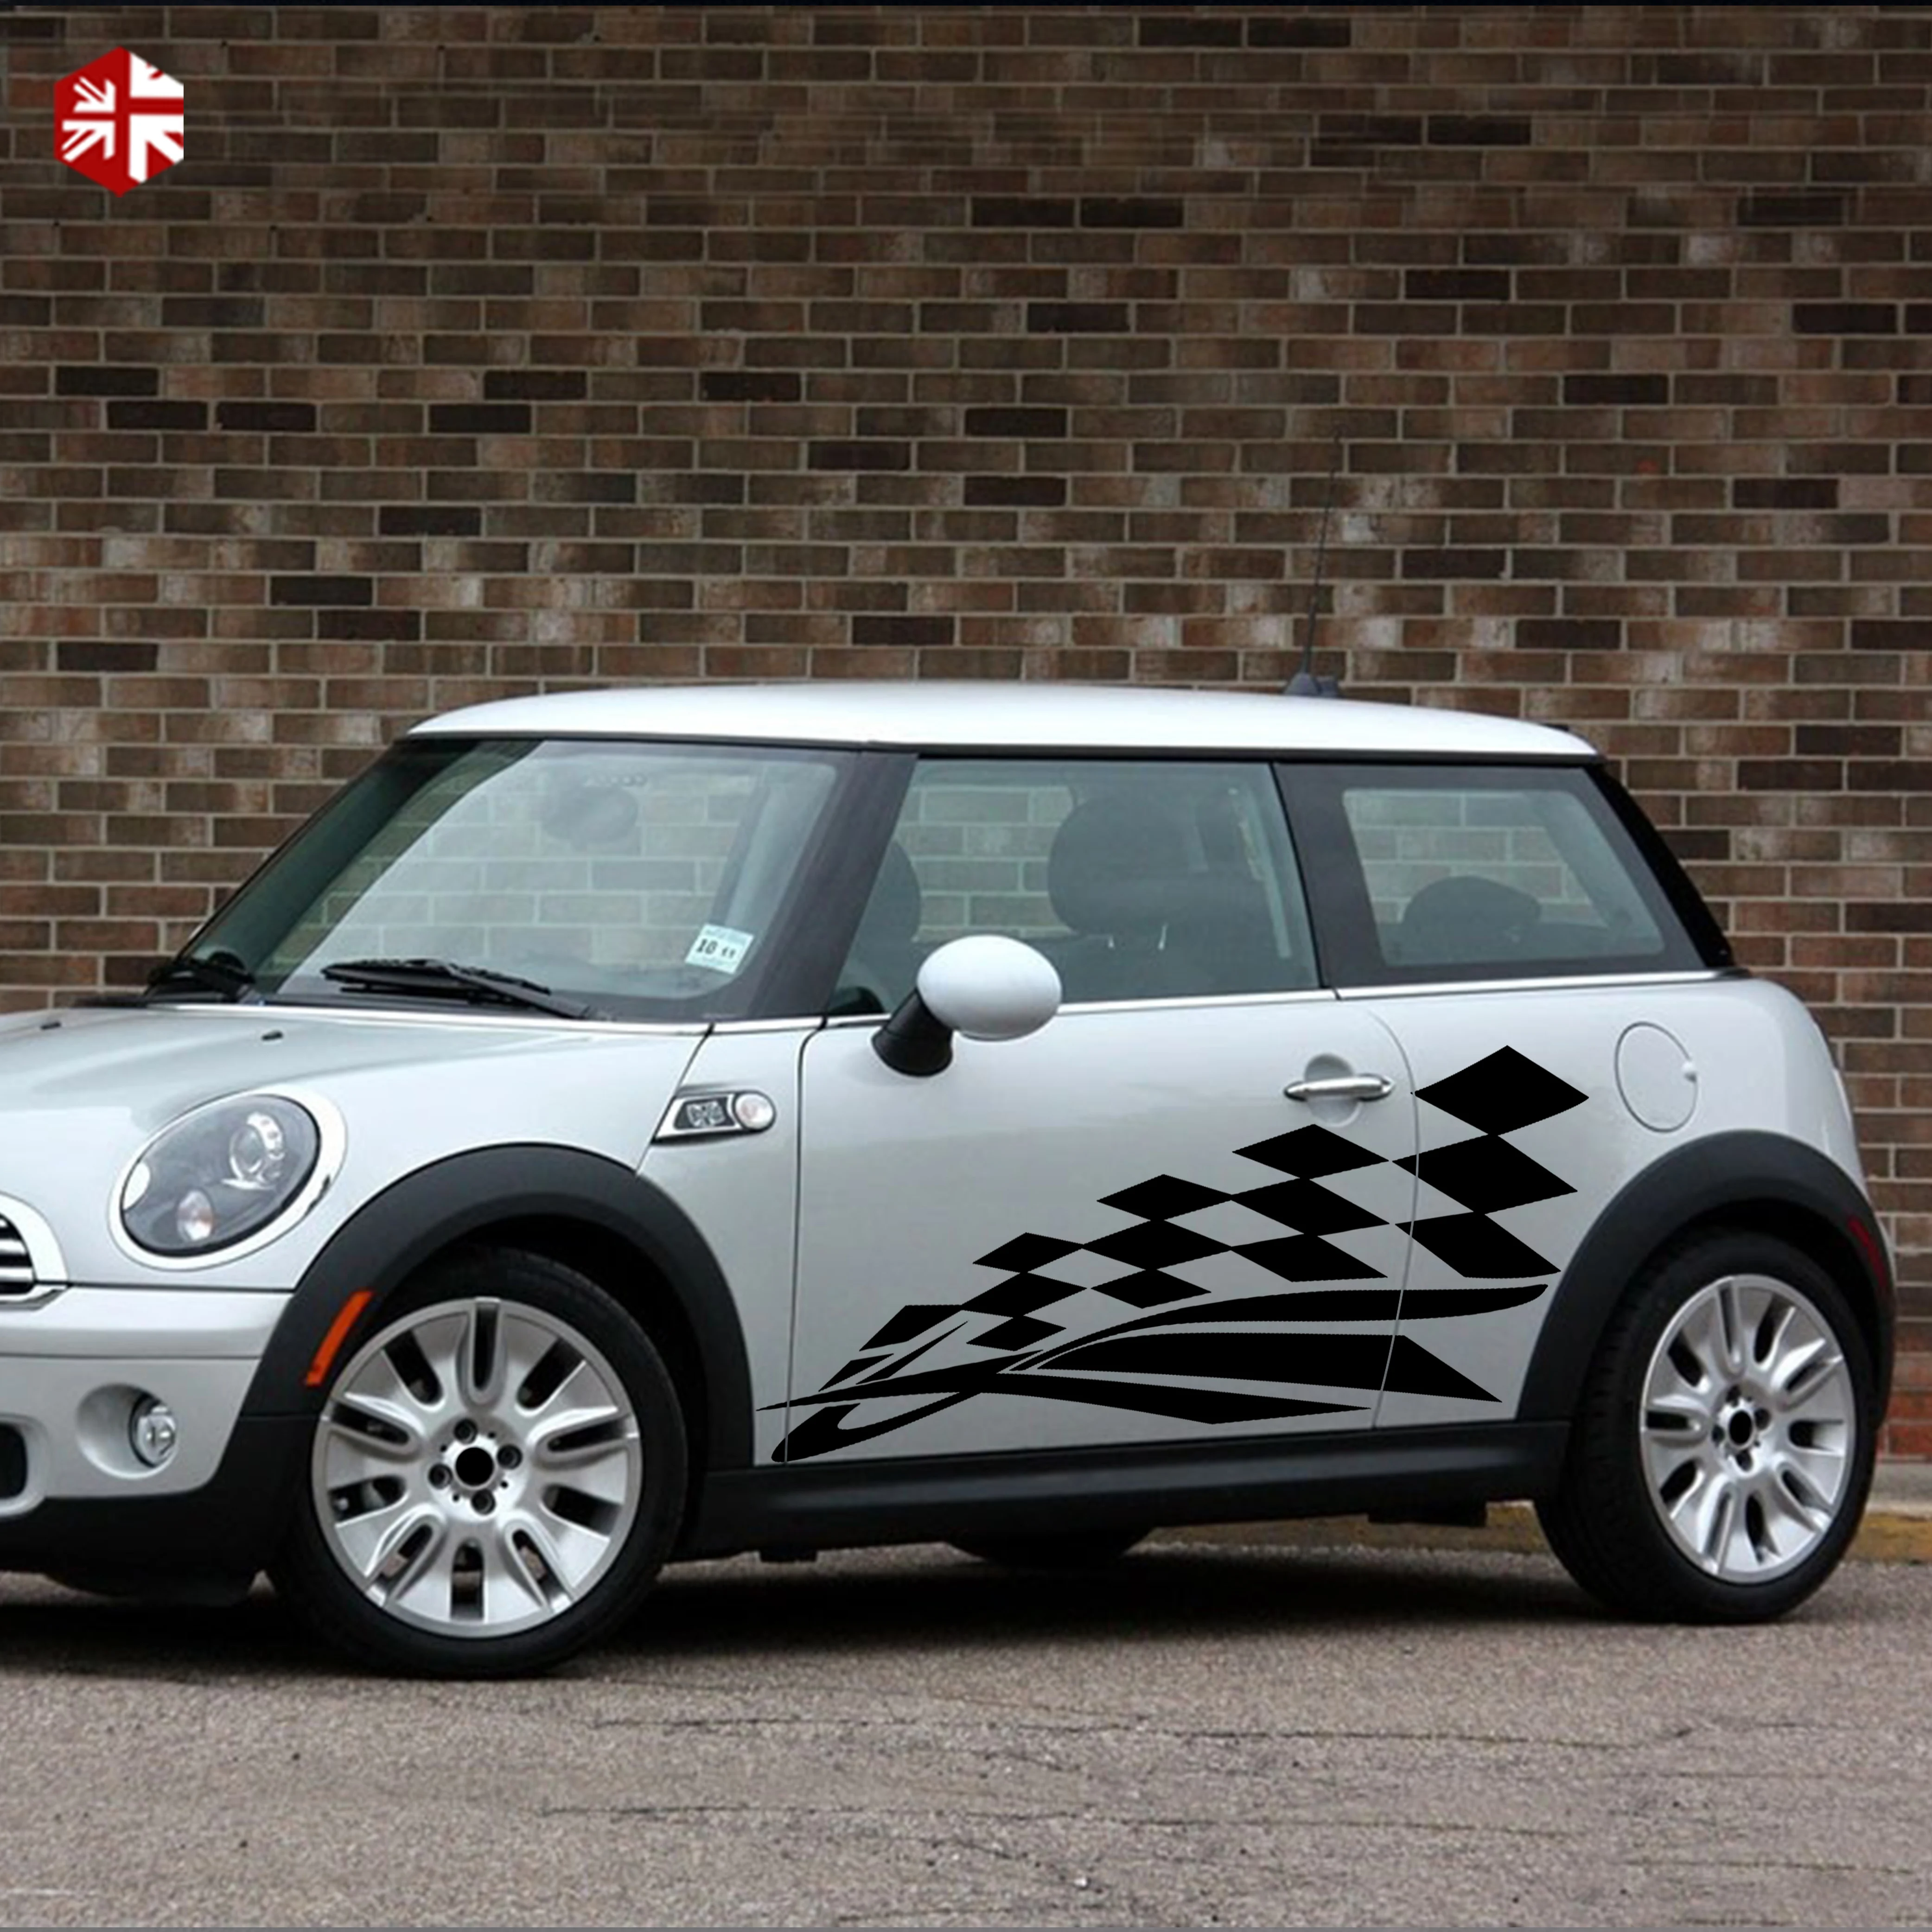 2X Checkered Flag Styling Car Door Side Stripes Body Vinyl Decal For MINI Cooper S R56 2006-2013 One JCW Accessories